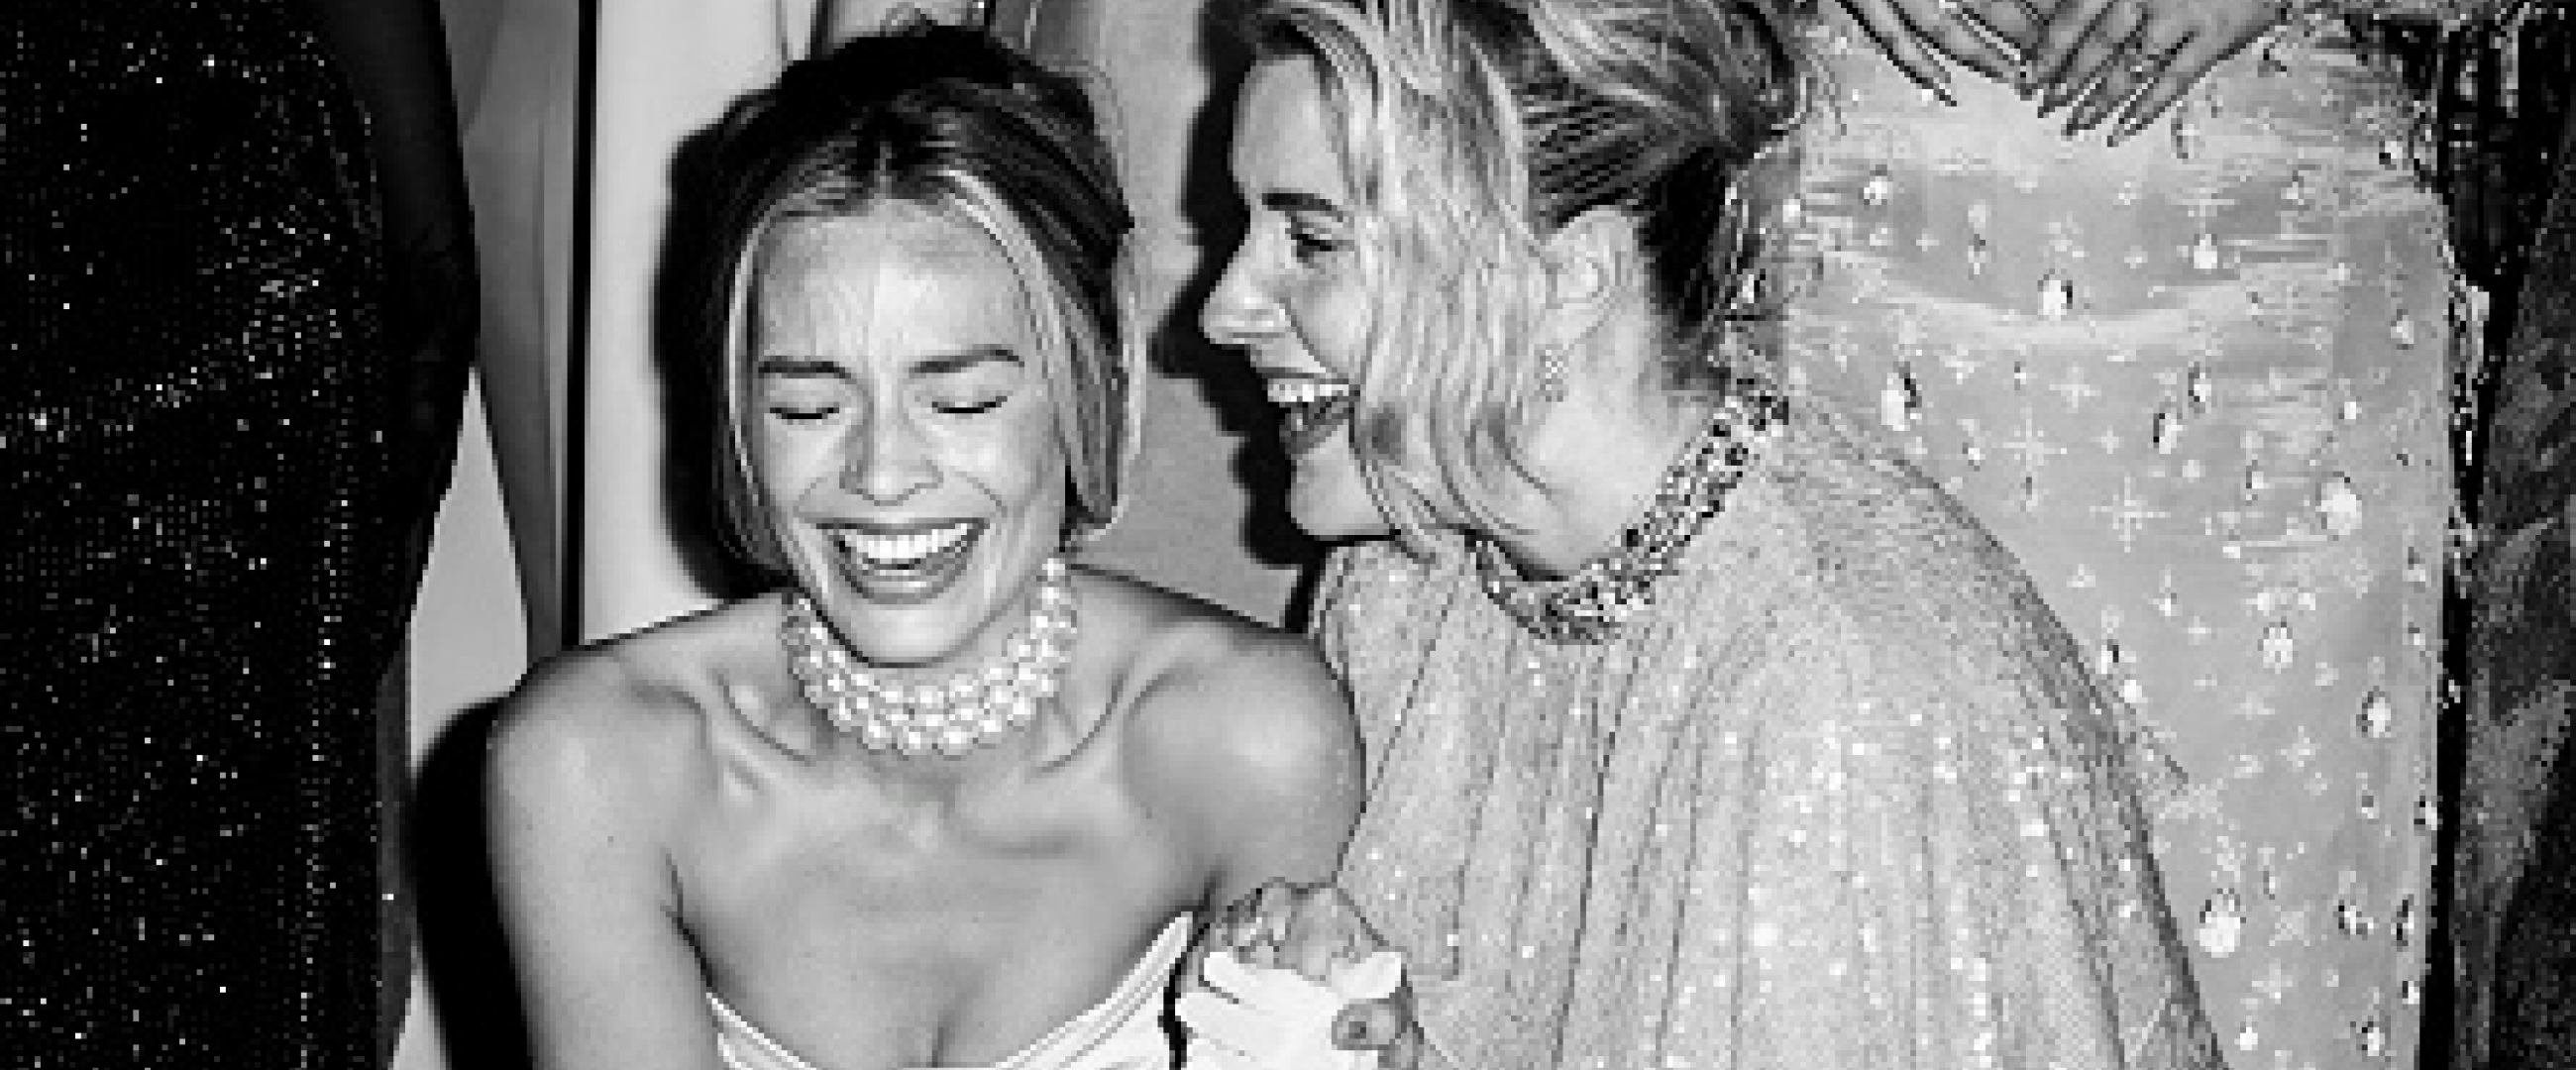 Black and white photo of producer-actress Margot Robbie and director Greta Gerwig laughing together and clutching one another's hand during a red carpet publicity event for the "Barbie" movie